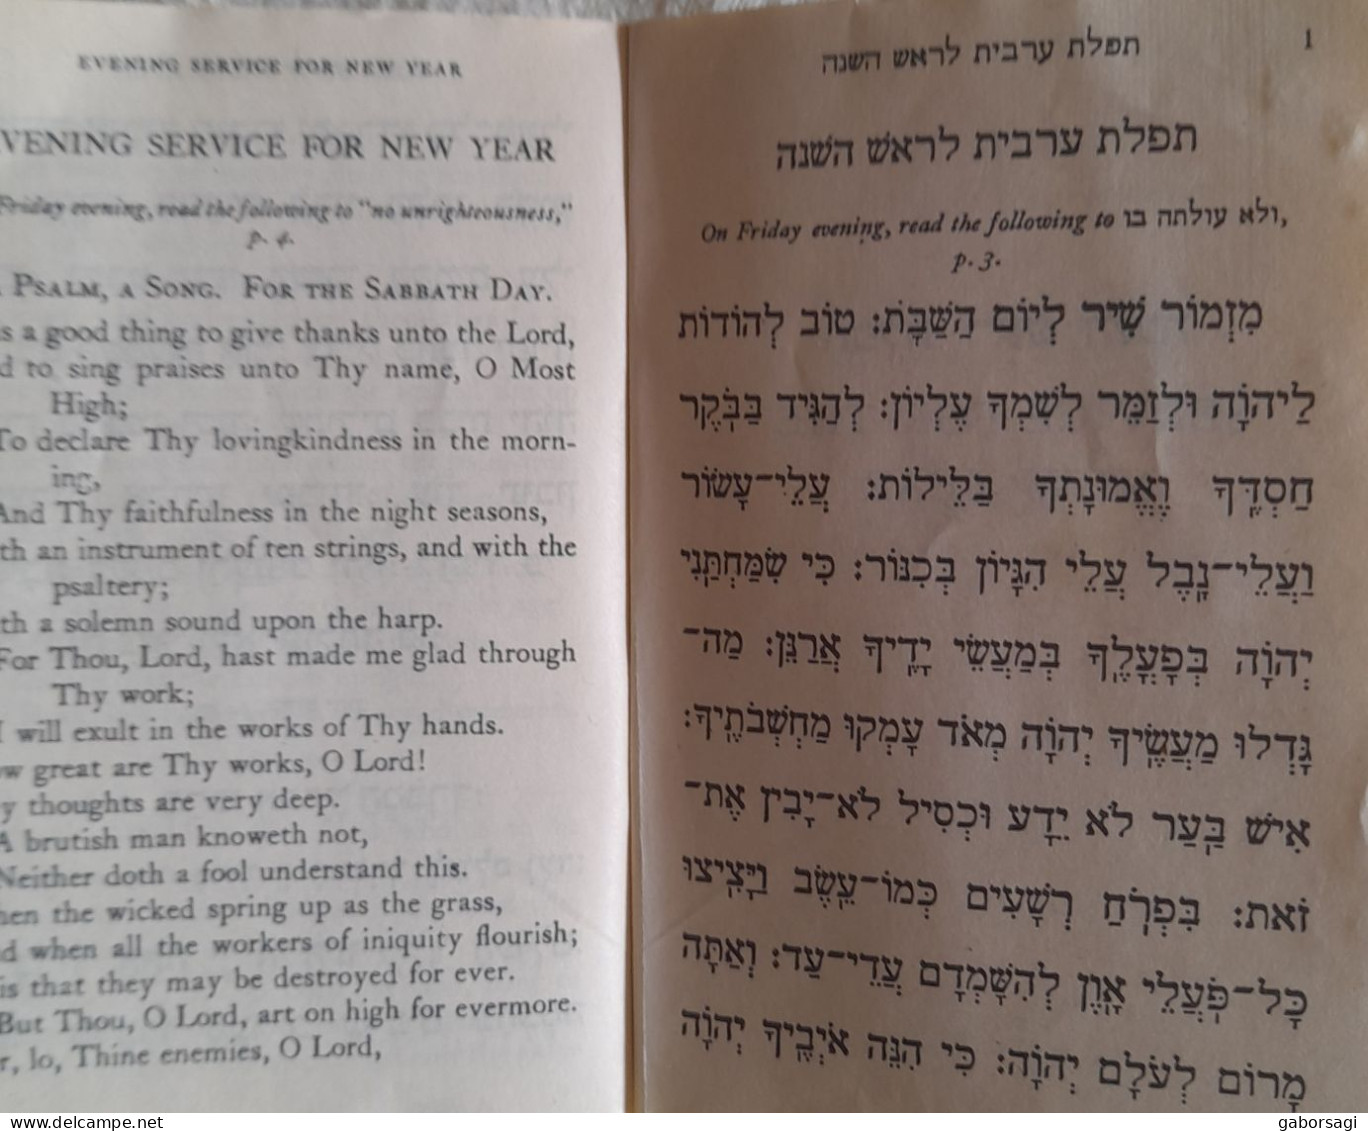 Prayer Book- New Year And Atonement - Abridged For Jews In The Armed Force Of The United States - Judaismo